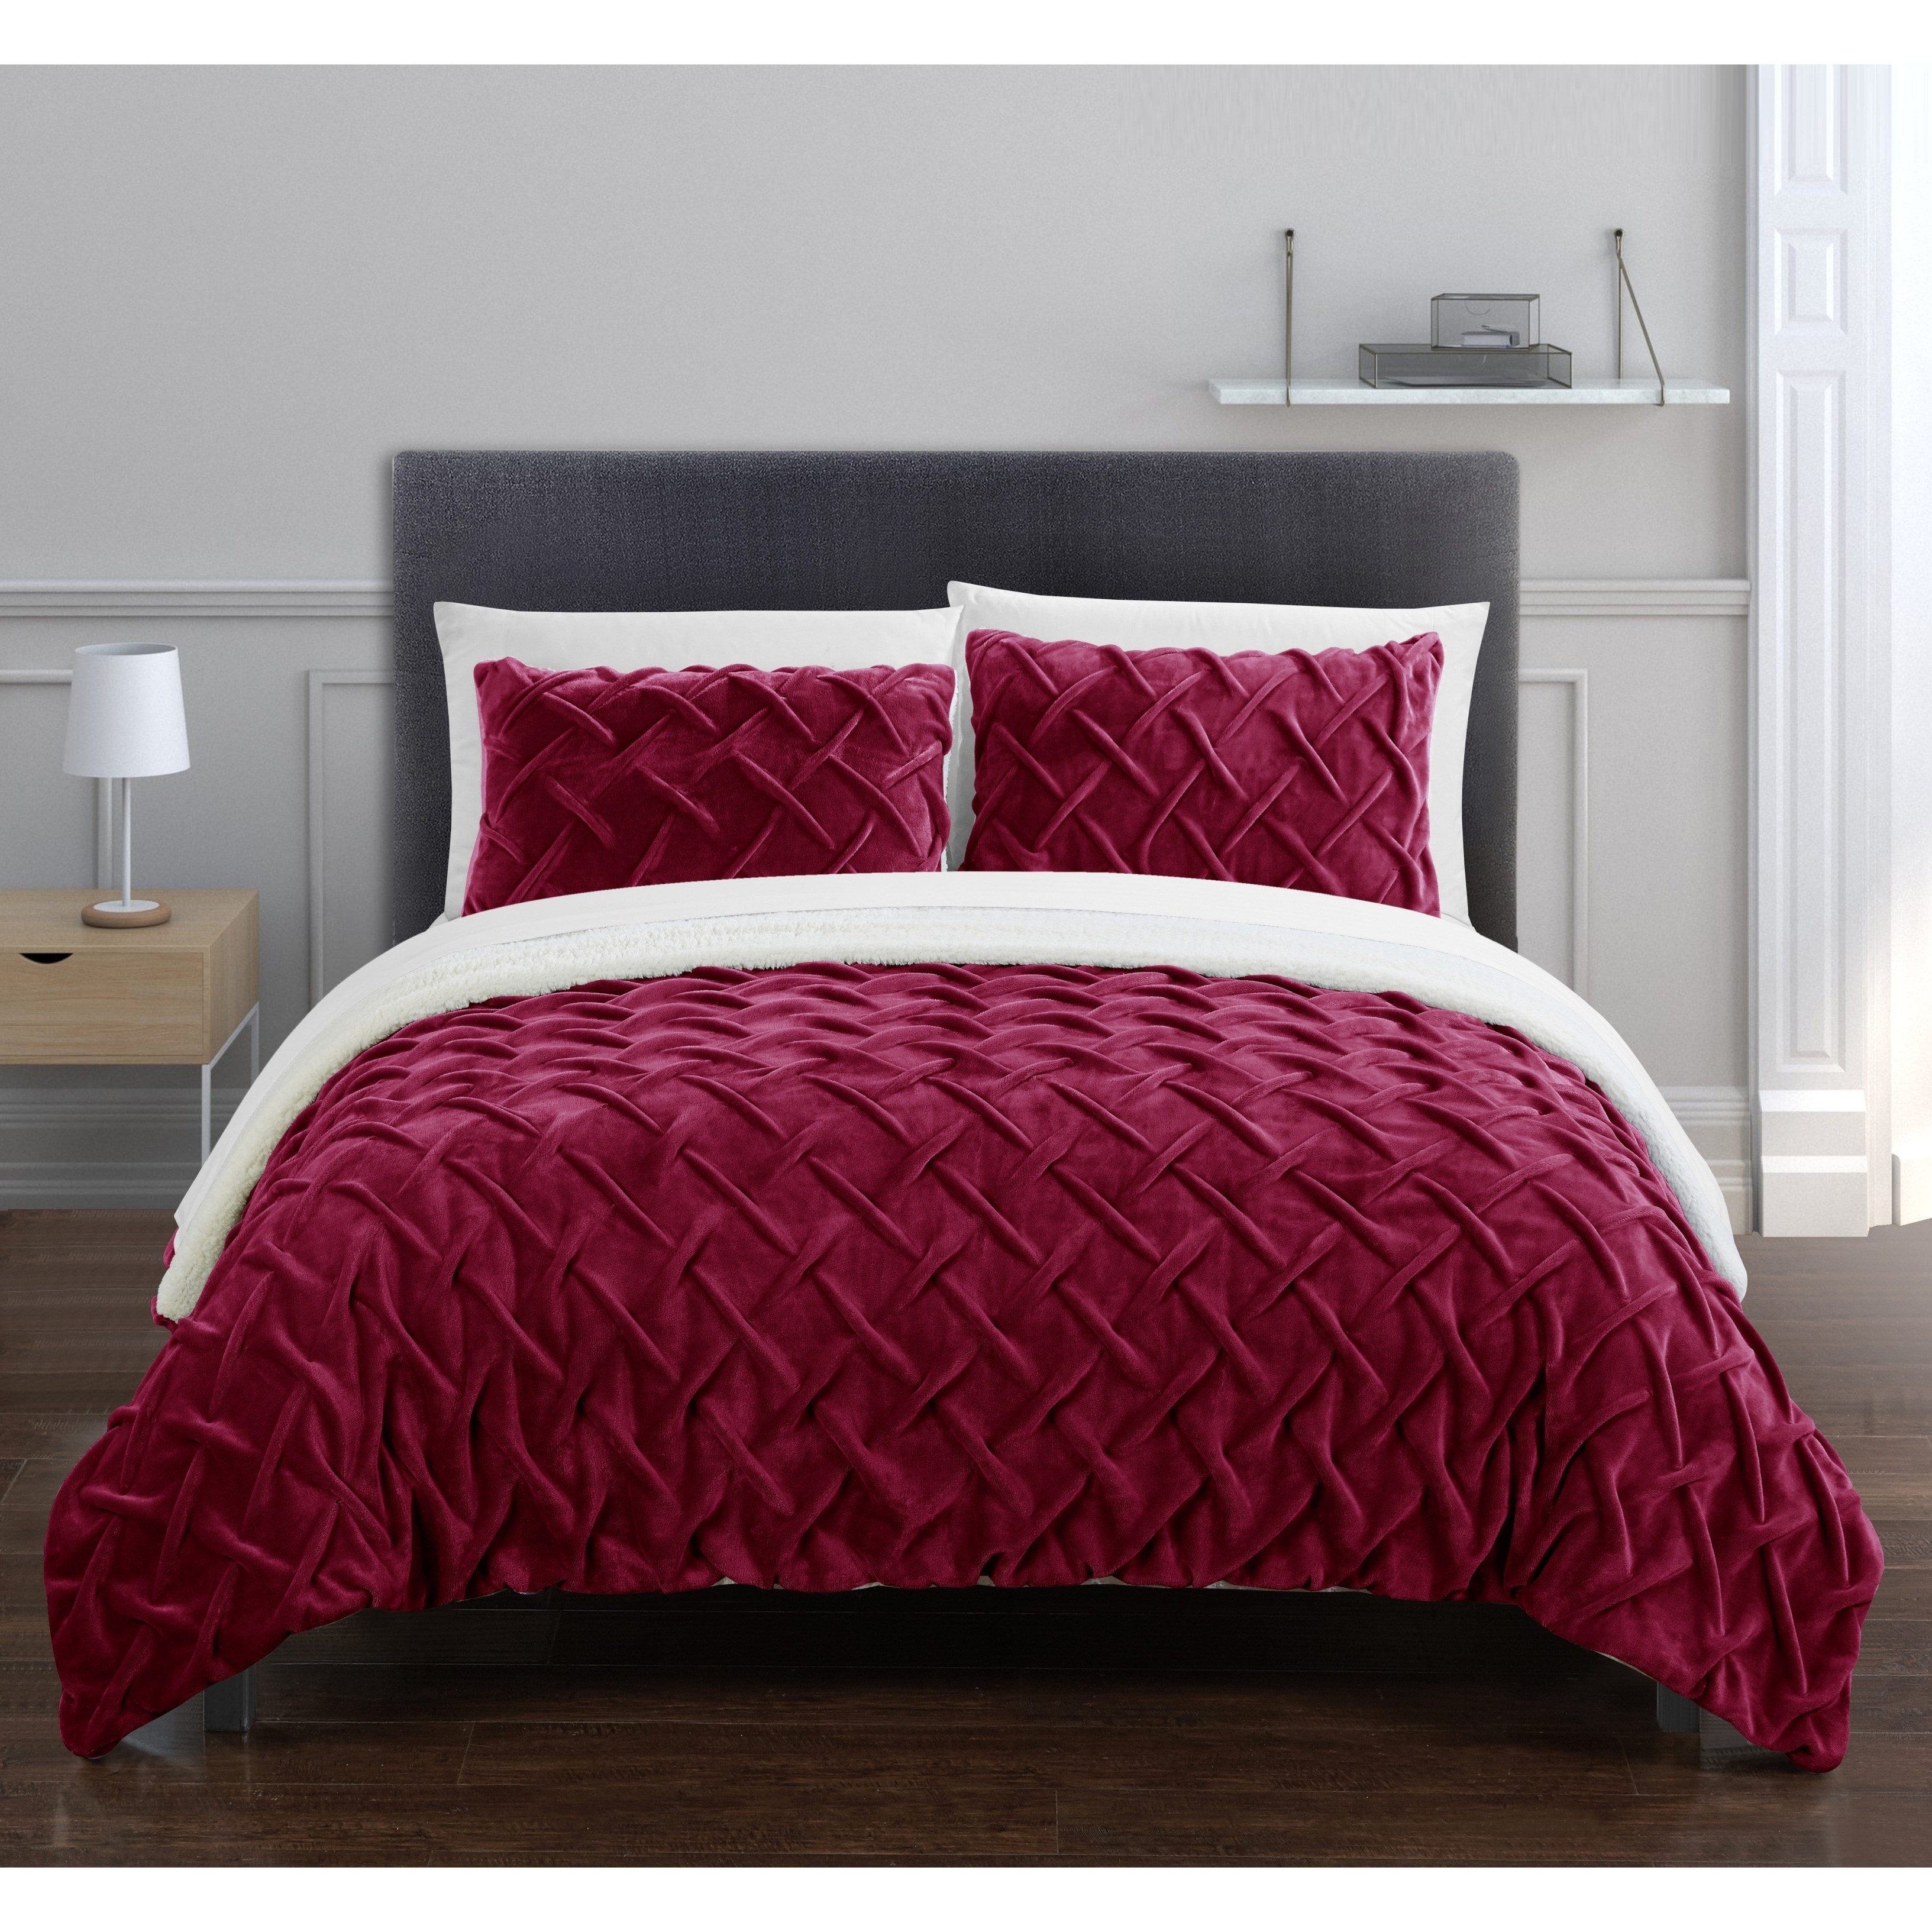 Geometric with Throw Pillows 7-Piece Chic Ruched Pink Duvet Cover Set 